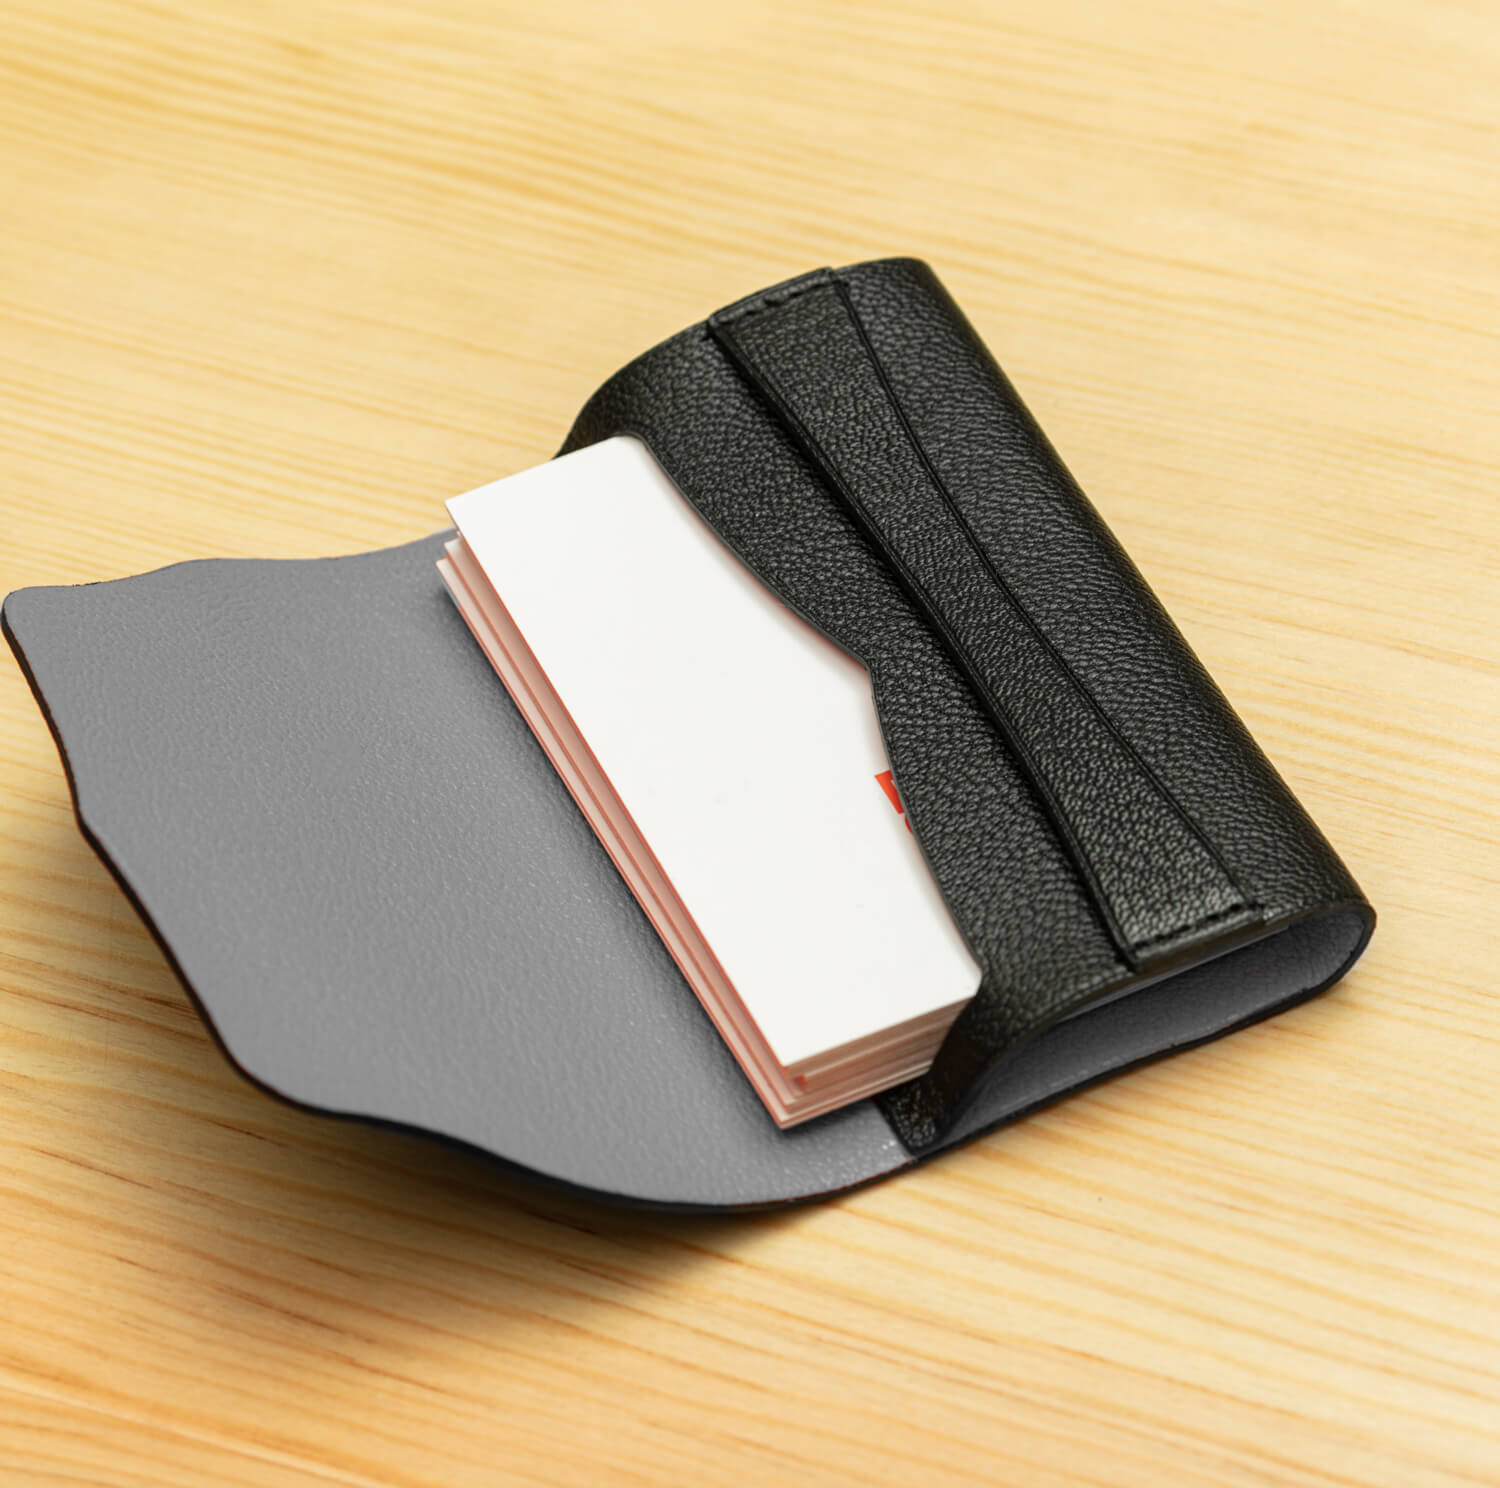 Serel's Natty Business Card Holder cover open on the table